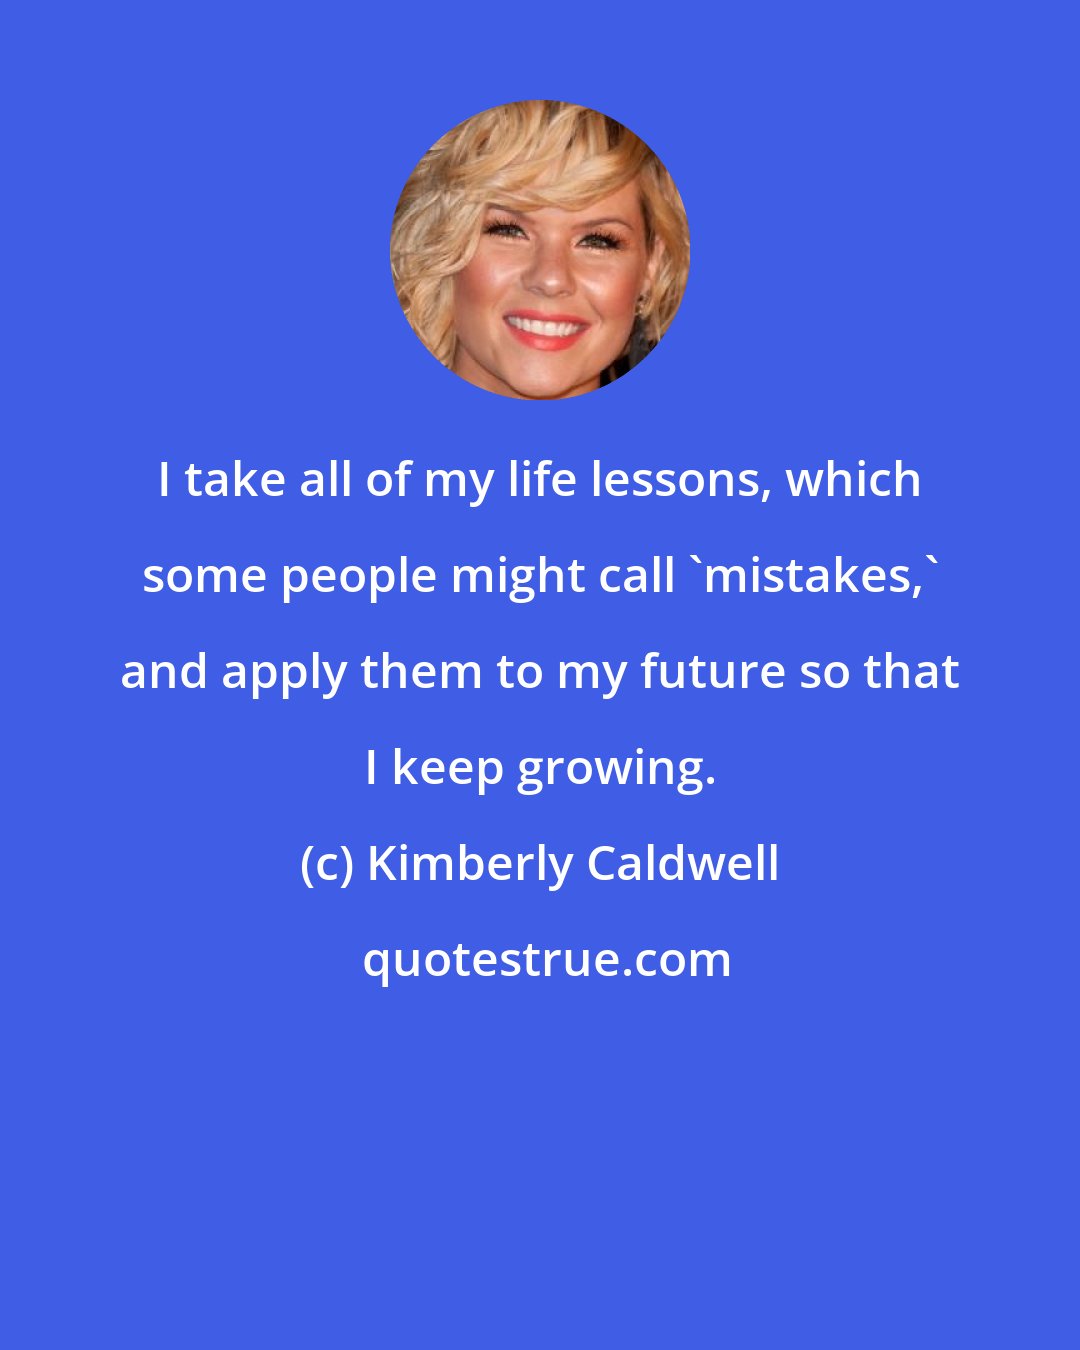 Kimberly Caldwell: I take all of my life lessons, which some people might call 'mistakes,' and apply them to my future so that I keep growing.